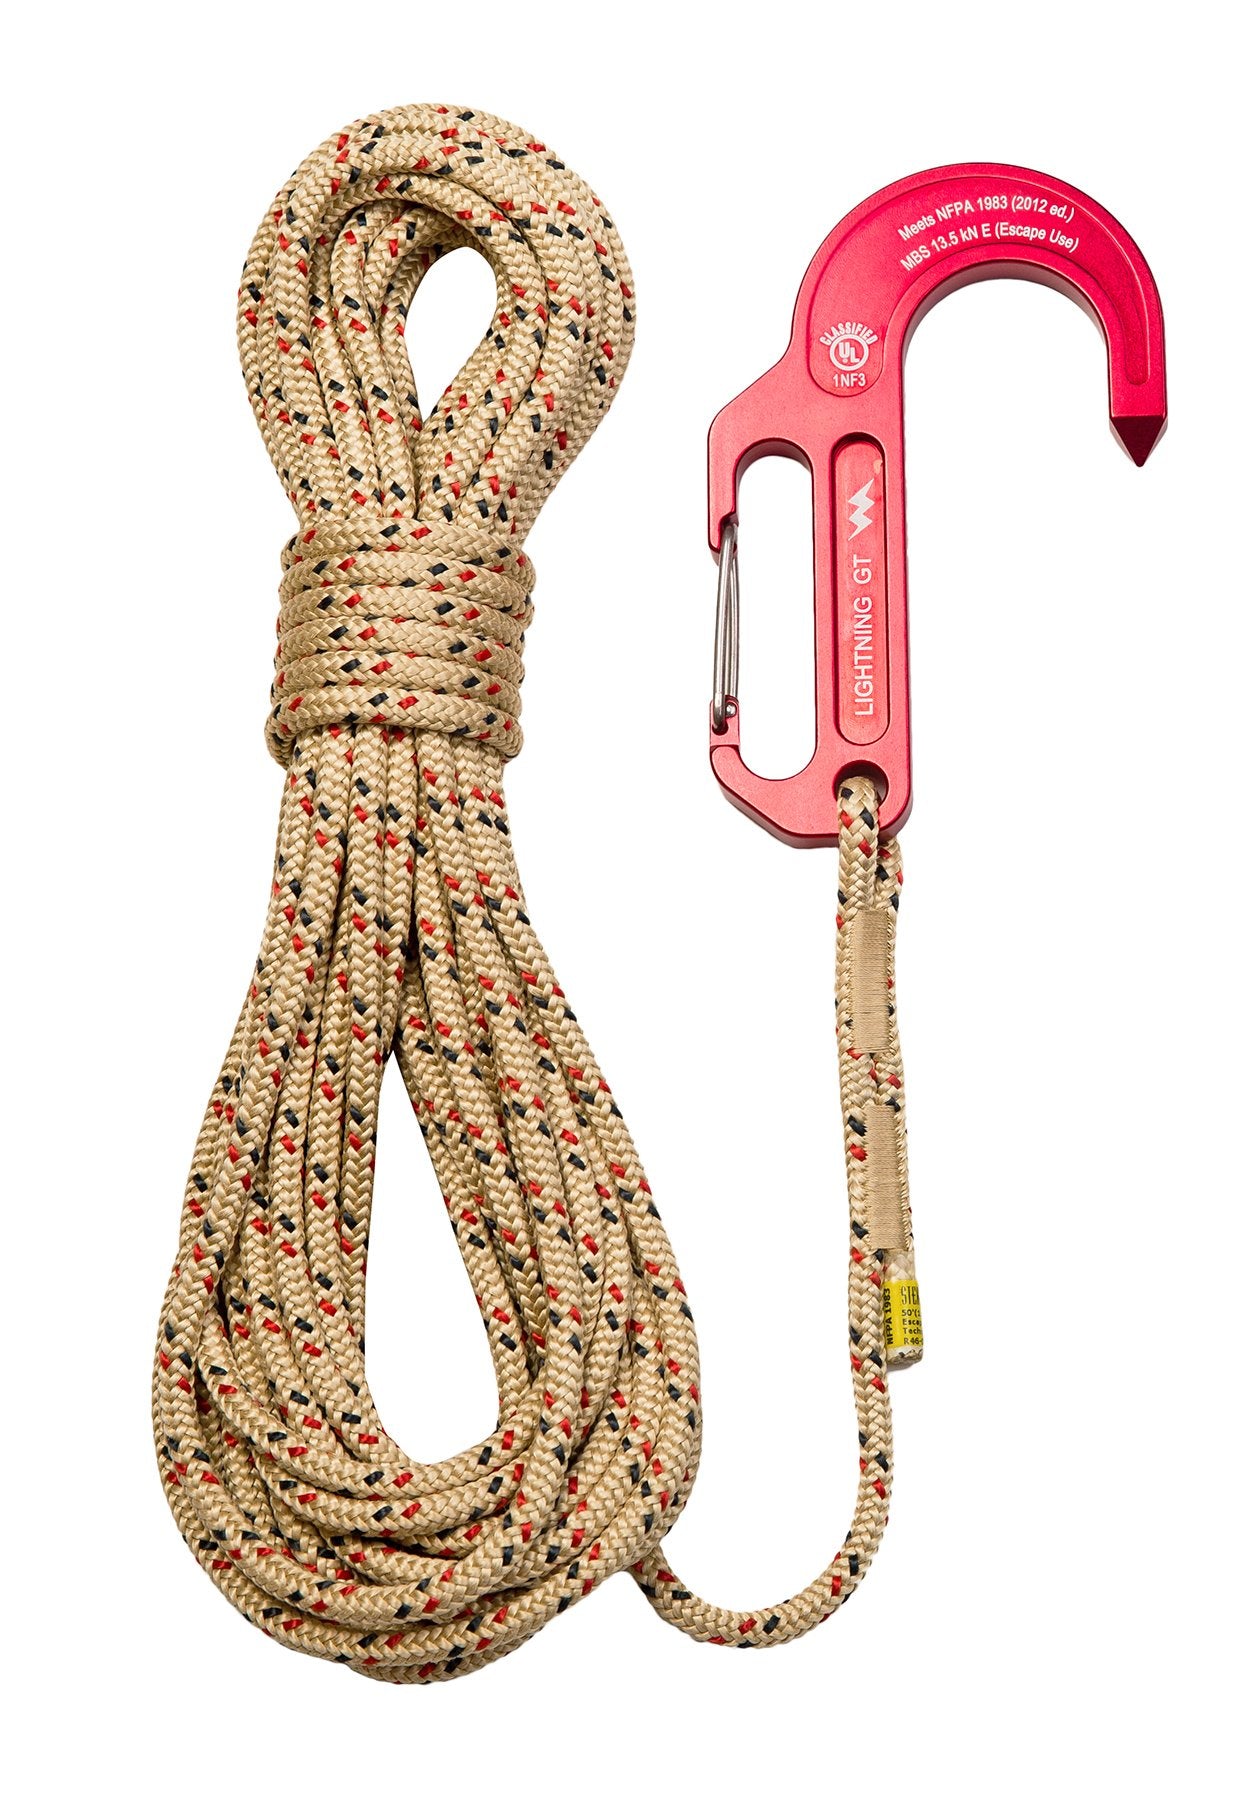 Stealth Escape Anchor Hook w/50' of 8mm Nylon Escape Rope - Rock-N